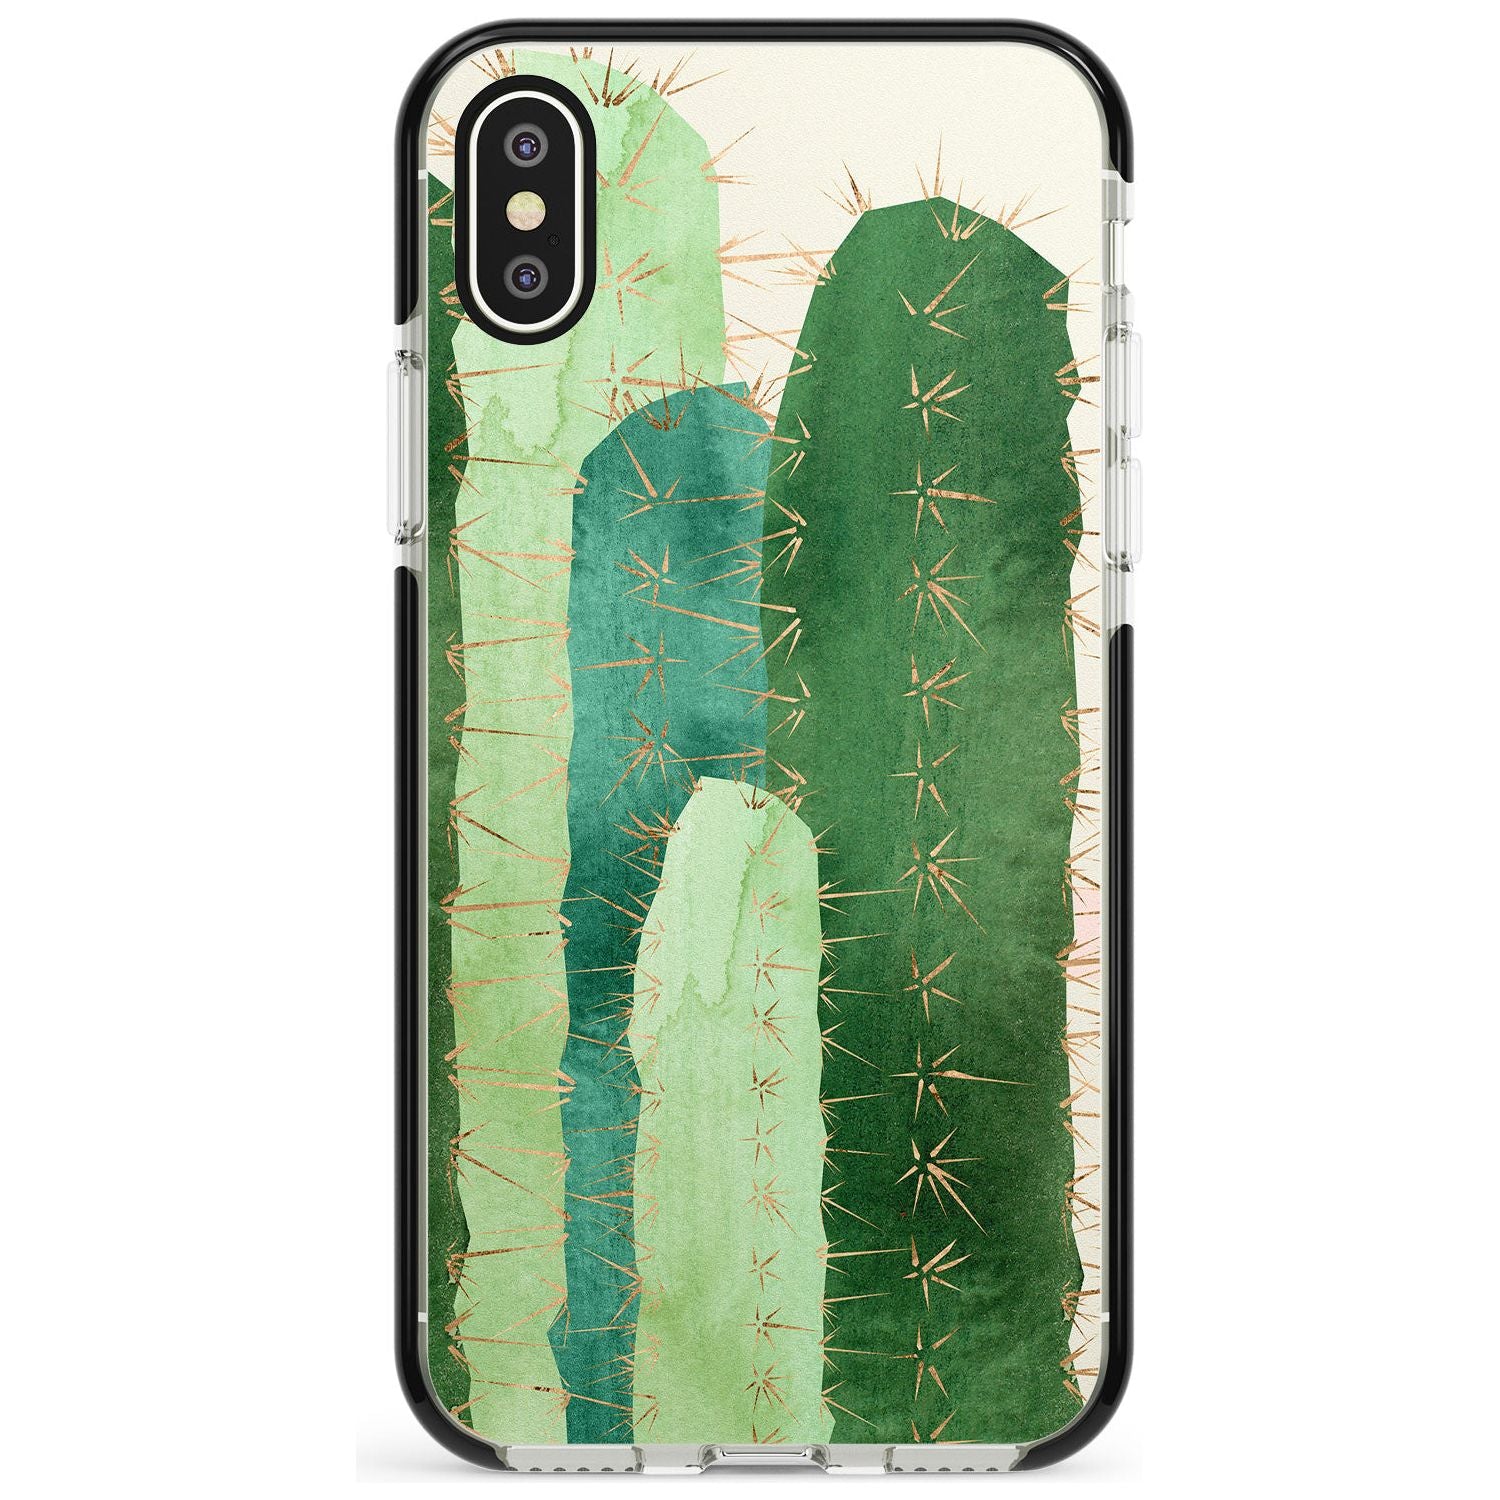 Large Cacti Mix Design Black Impact Phone Case for iPhone X XS Max XR